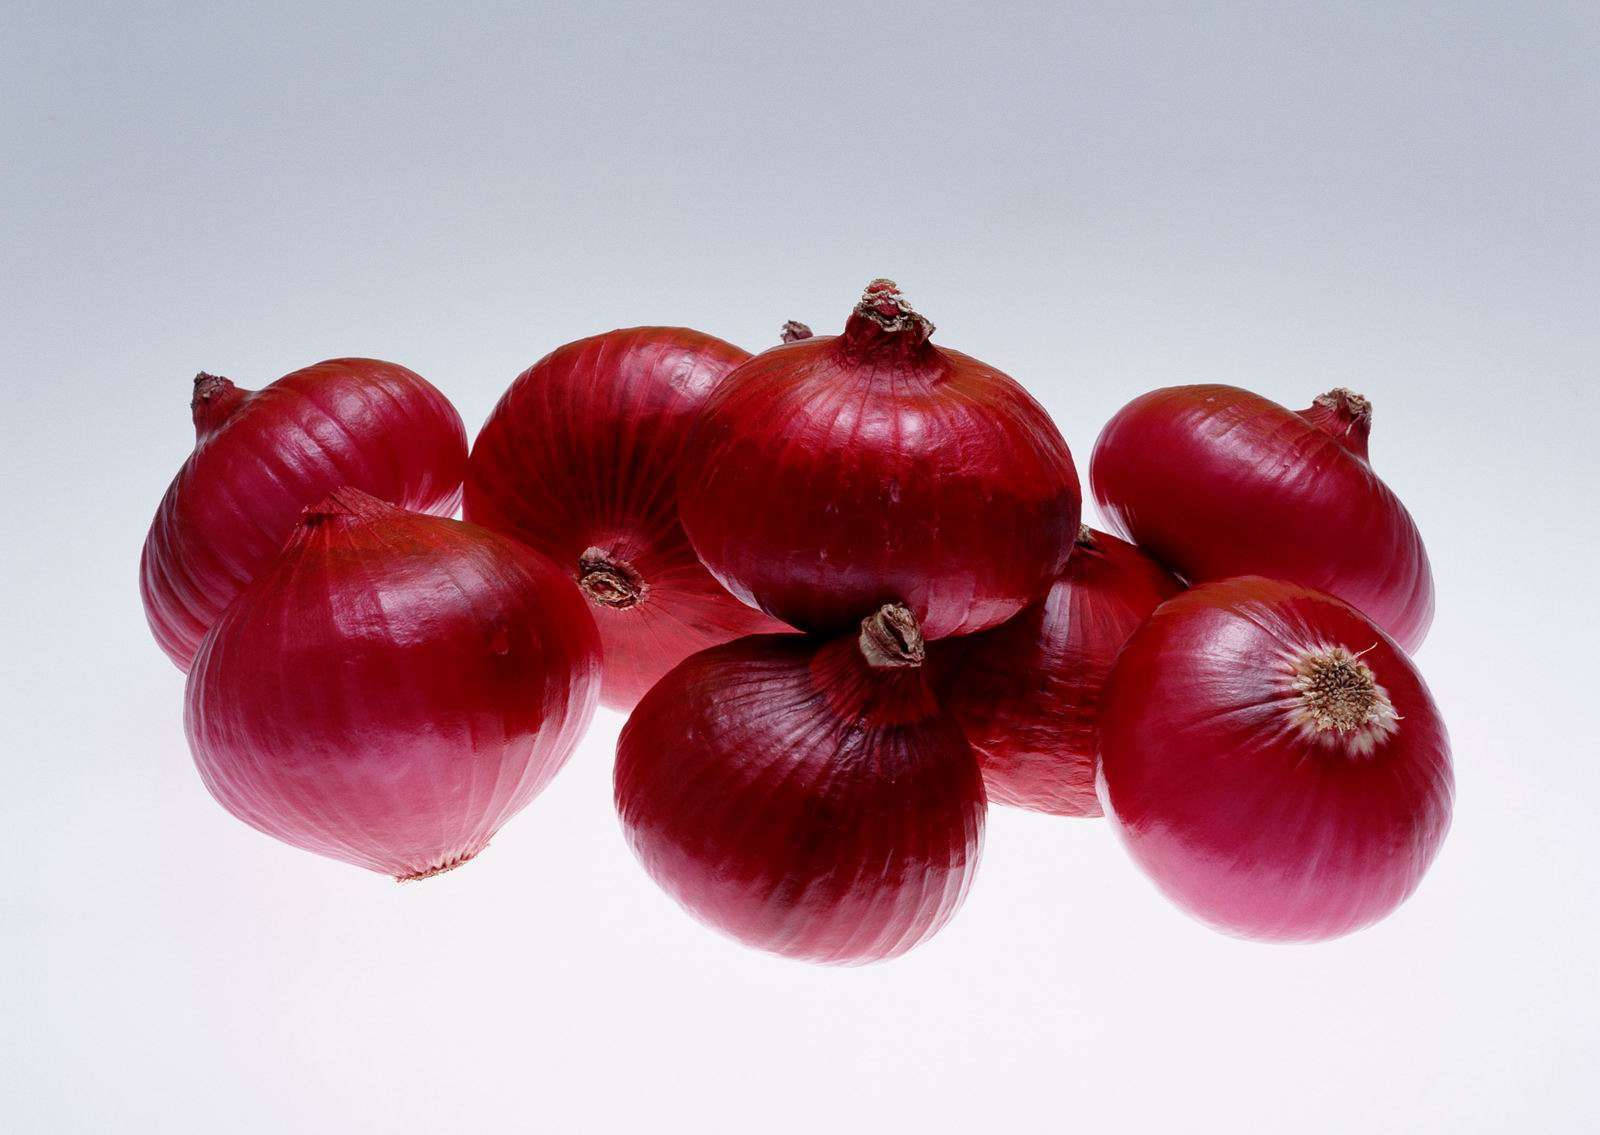 Perfectly Bright Juicy Red Onions Wallpaper